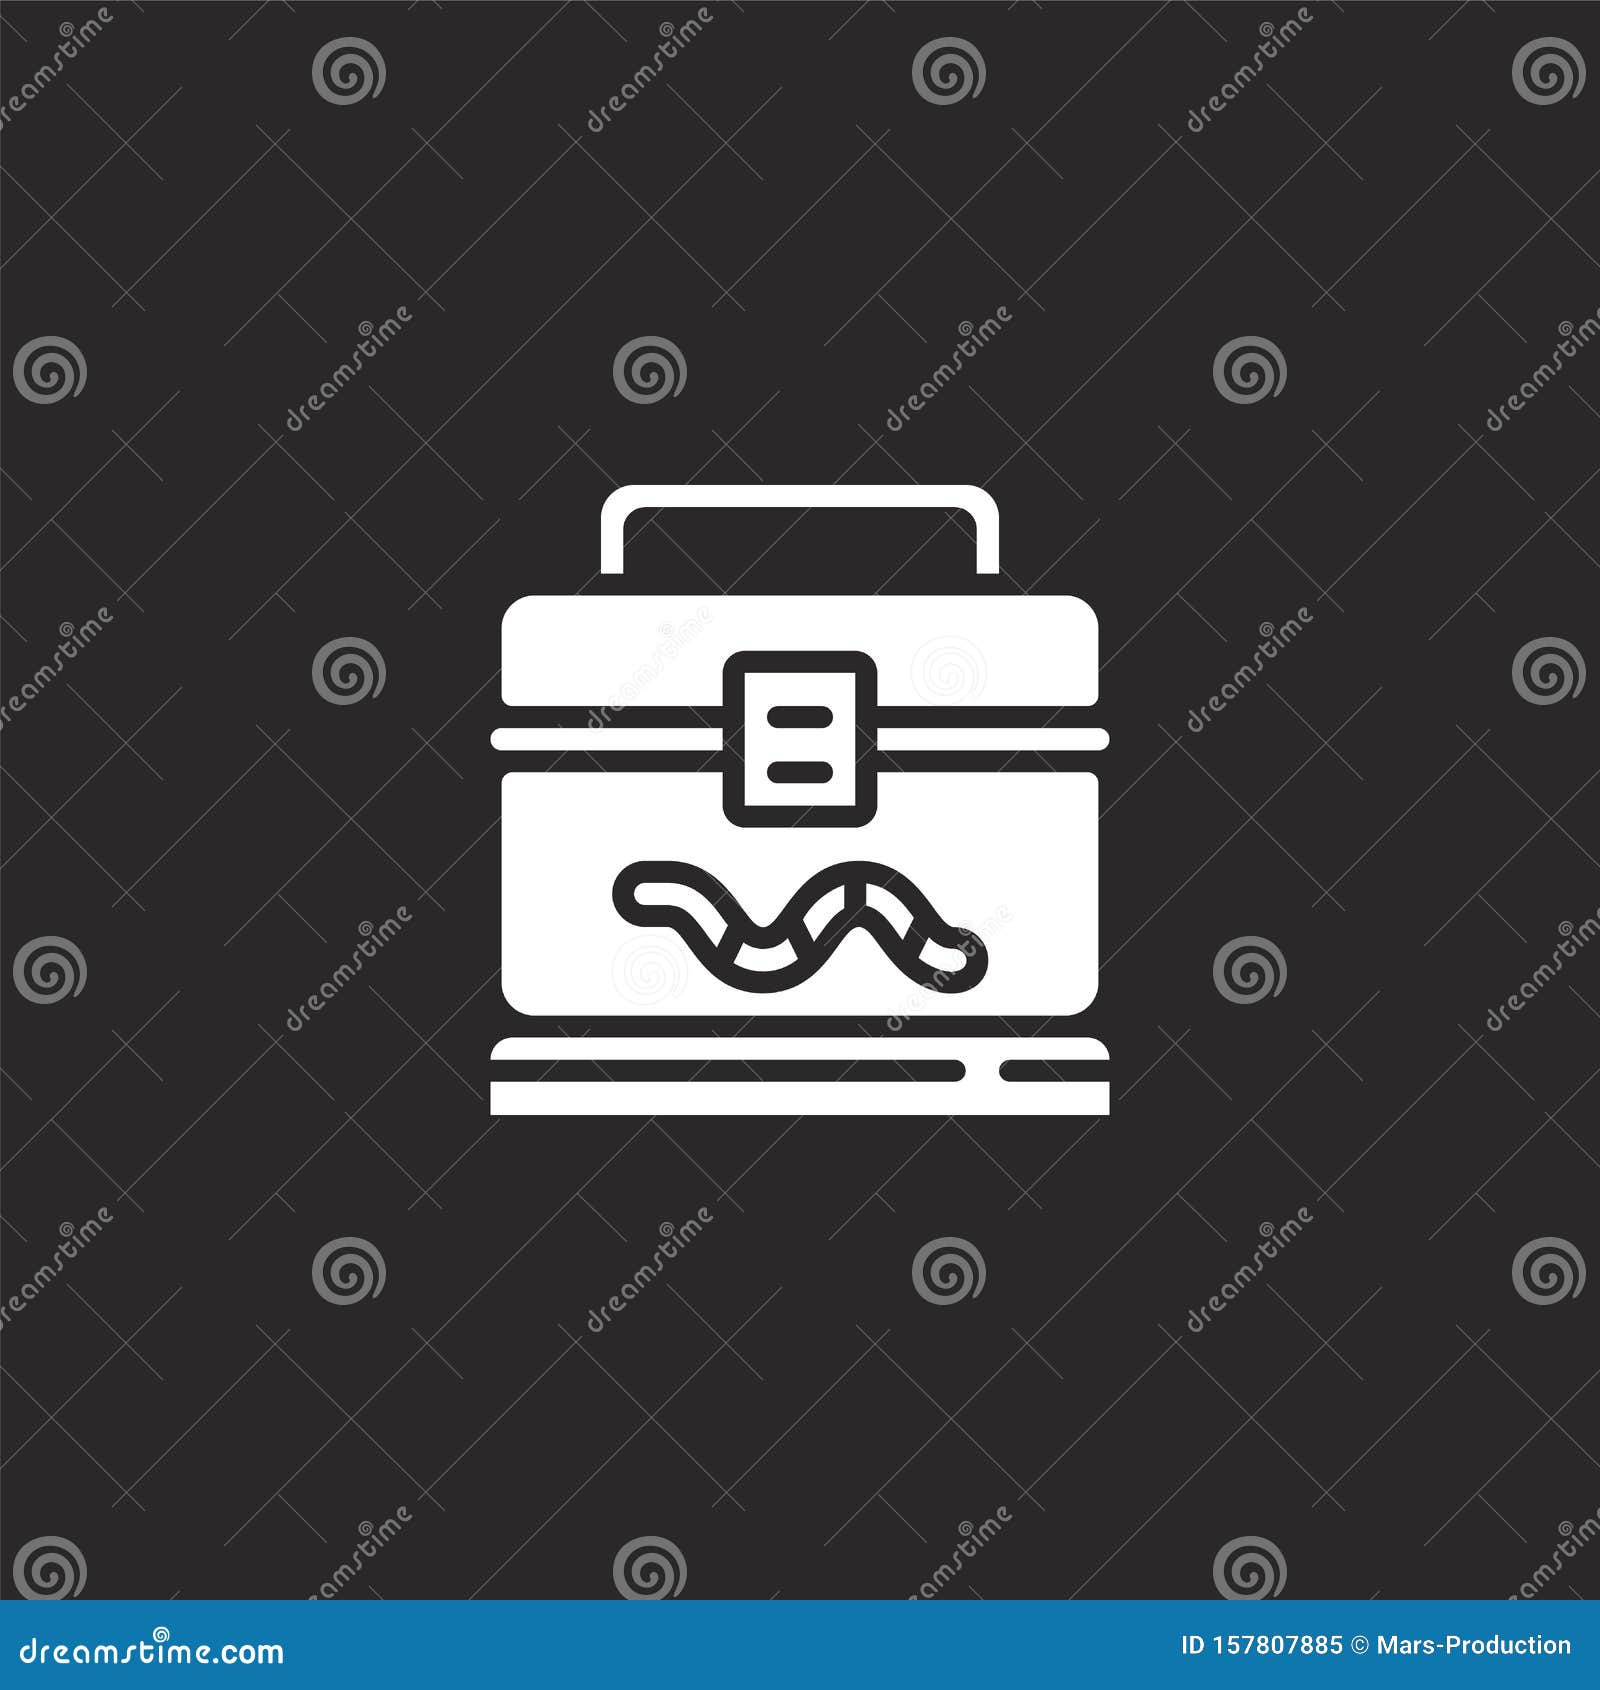 Tackle Box Icon. Filled Tackle Box Icon for Website Design and Mobile, App  Development Stock Vector - Illustration of equipment, design: 157807885